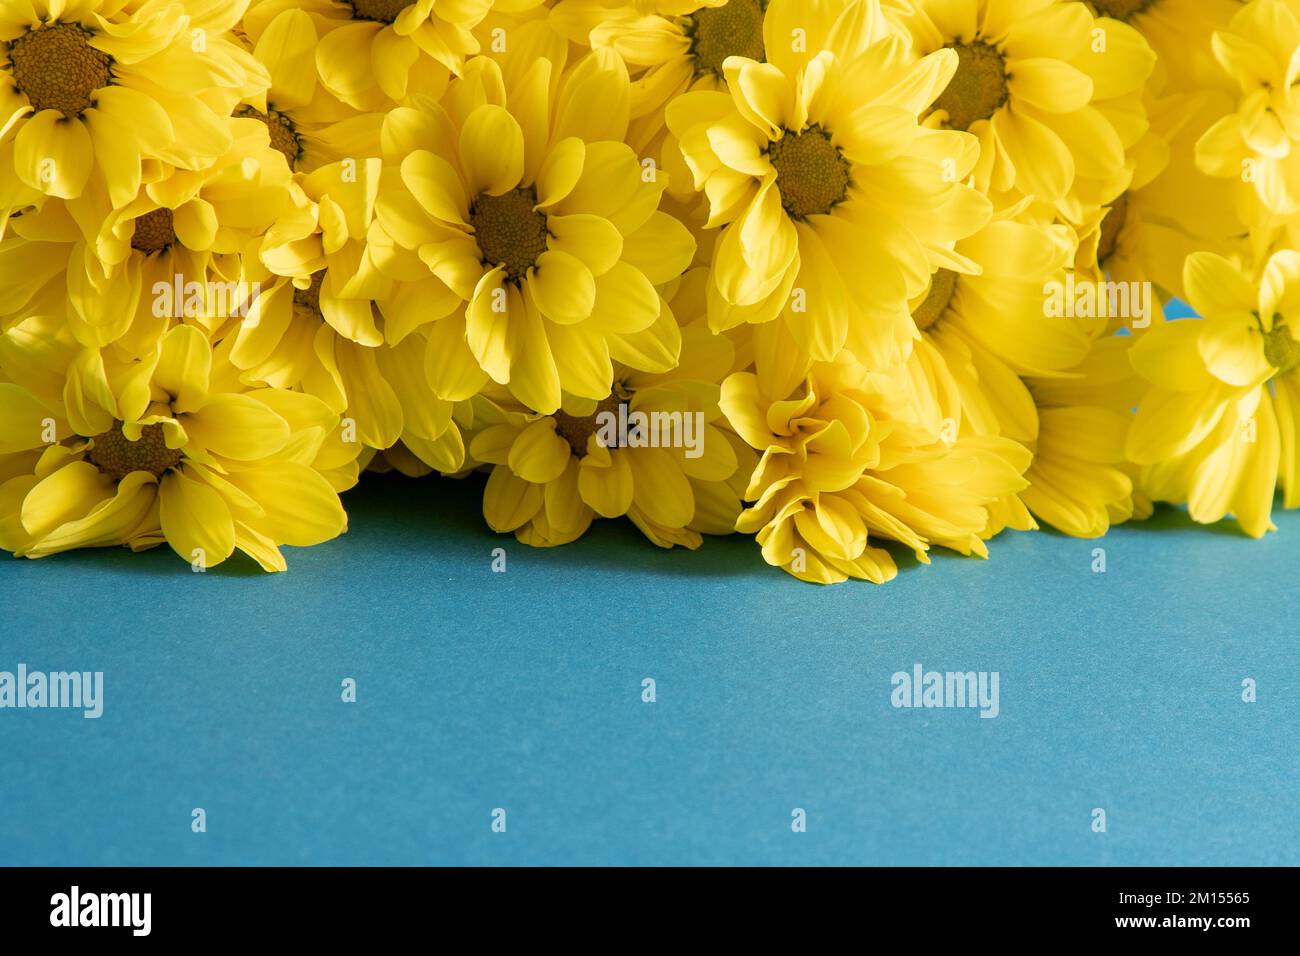 Yellow chrysanthemum flowers. Flower close-up. Floral flowers on blue background. Copy space. Stock Photo